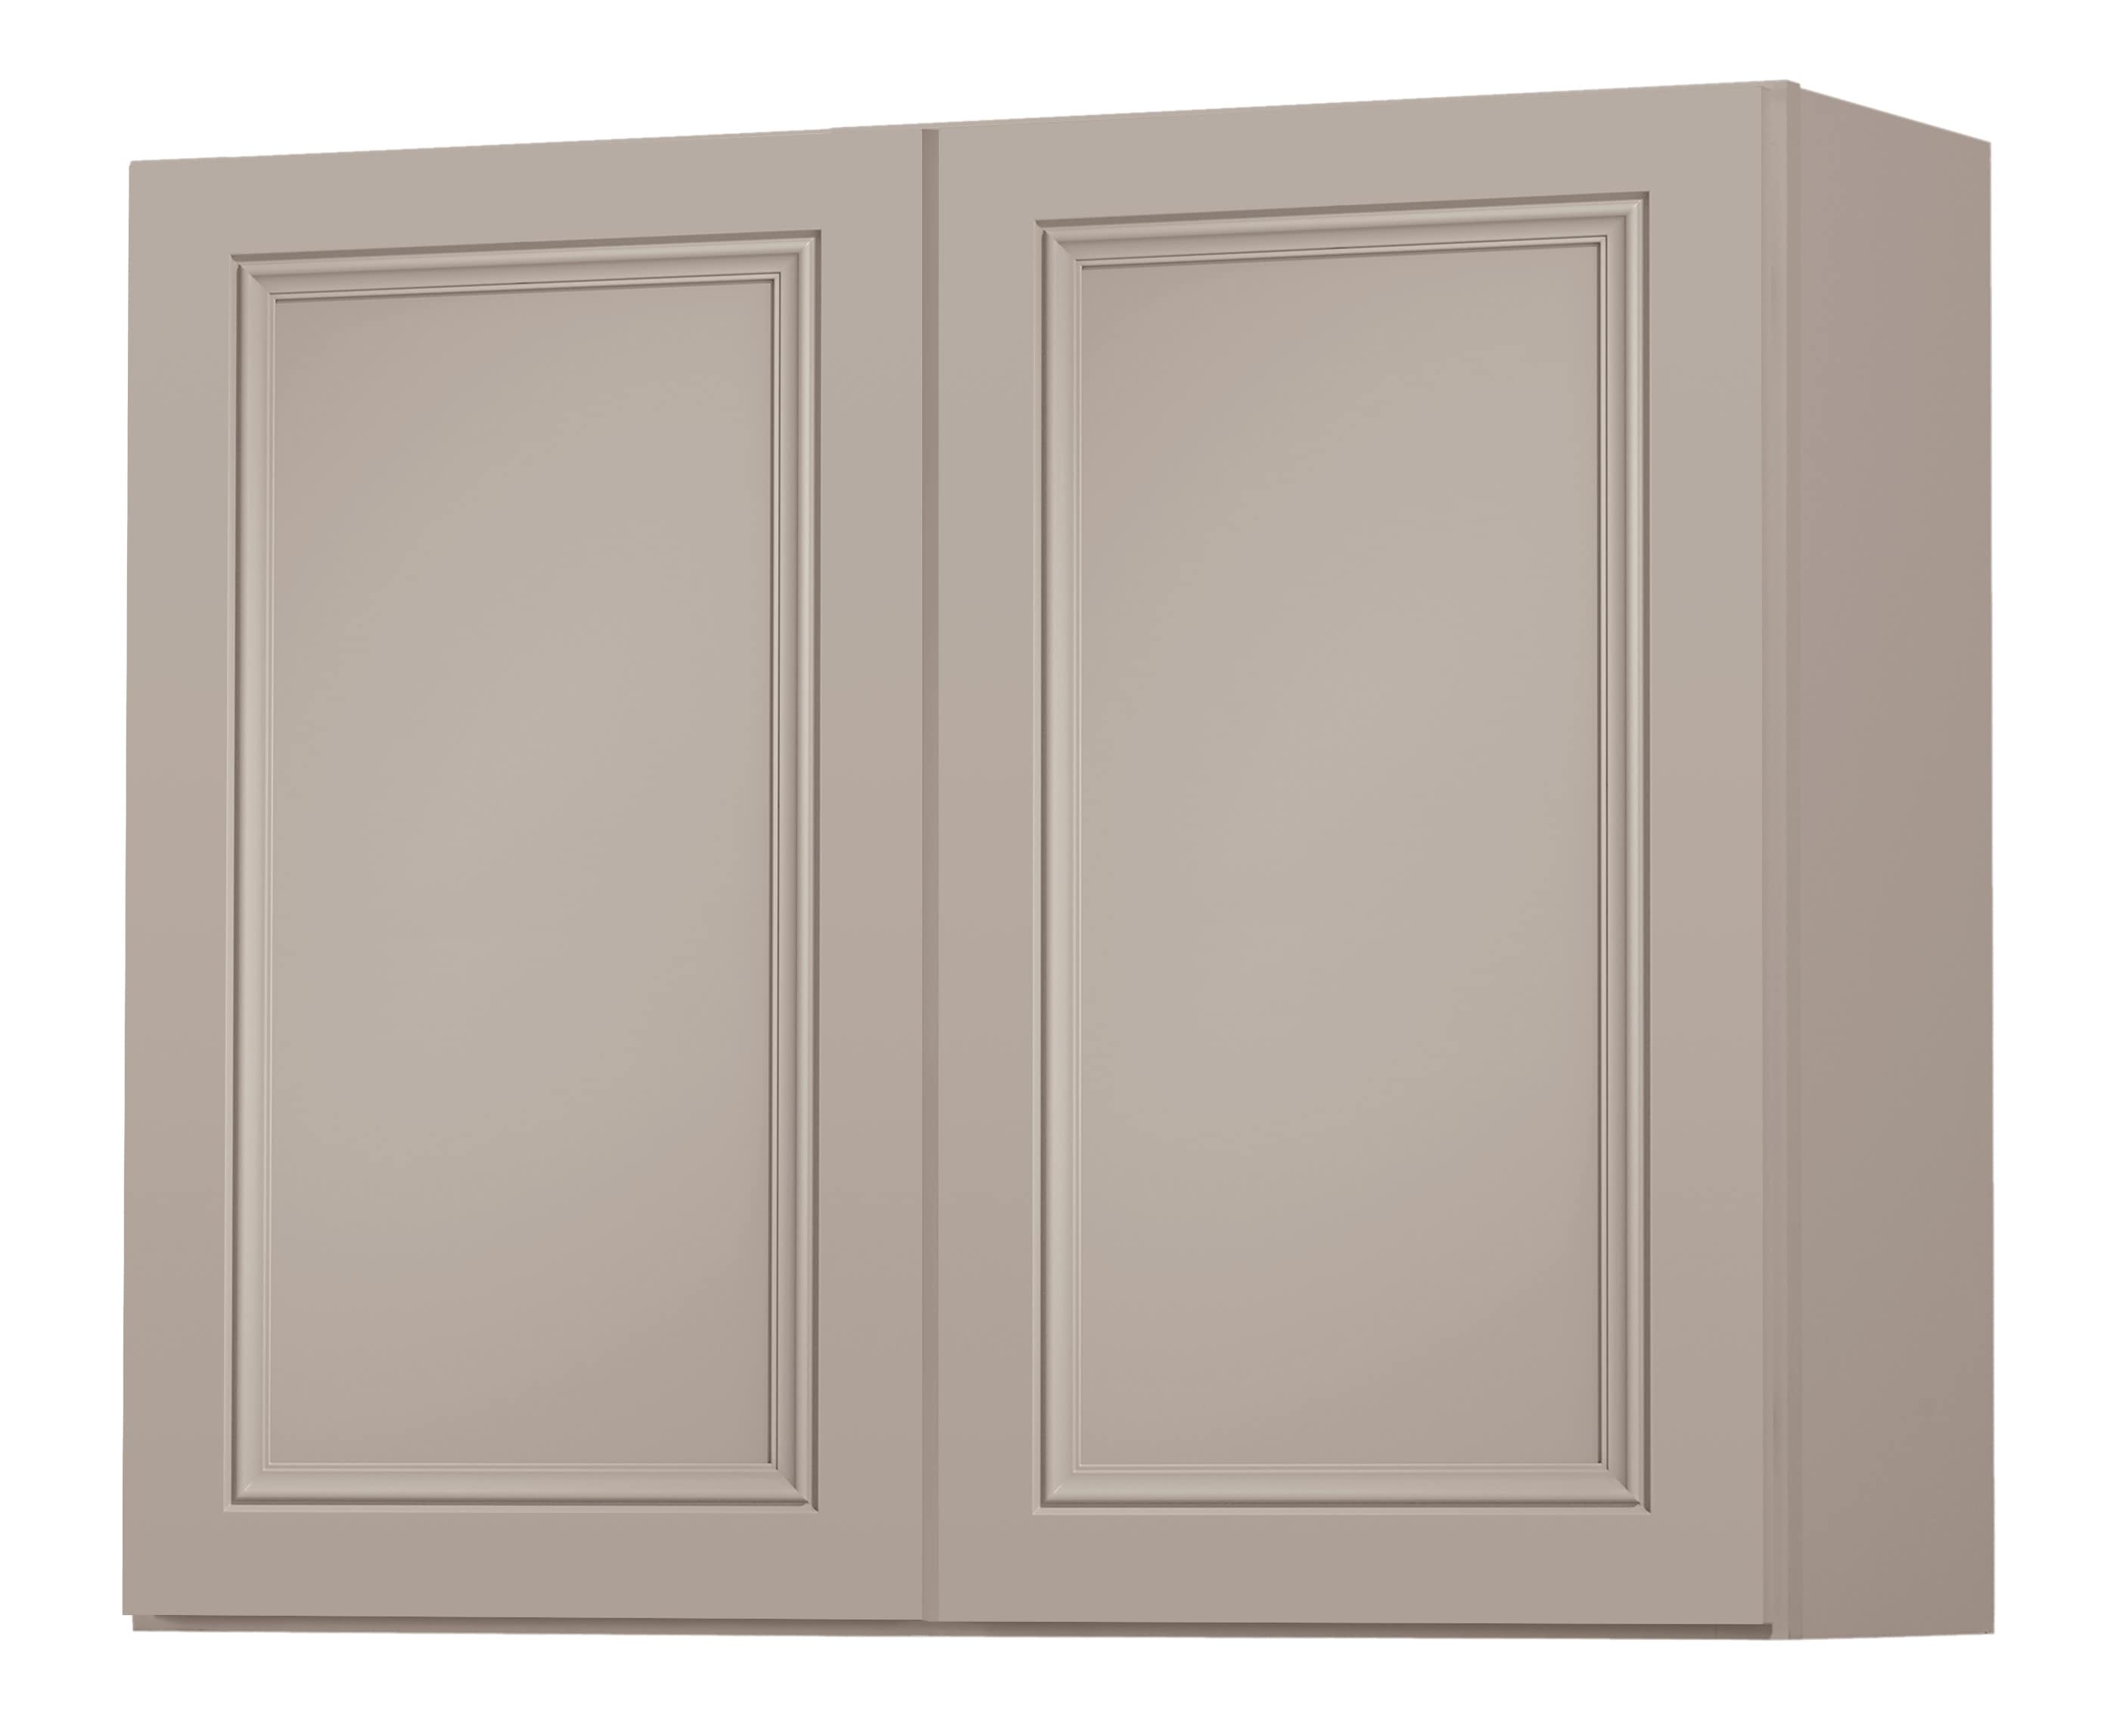 Wintucket 36-in W x 36-in H x 12-in D Cloud Gray Door Wall Fully Assembled Cabinet (Recessed Panel Square Door Style) | - Diamond NOW G15 W3636B